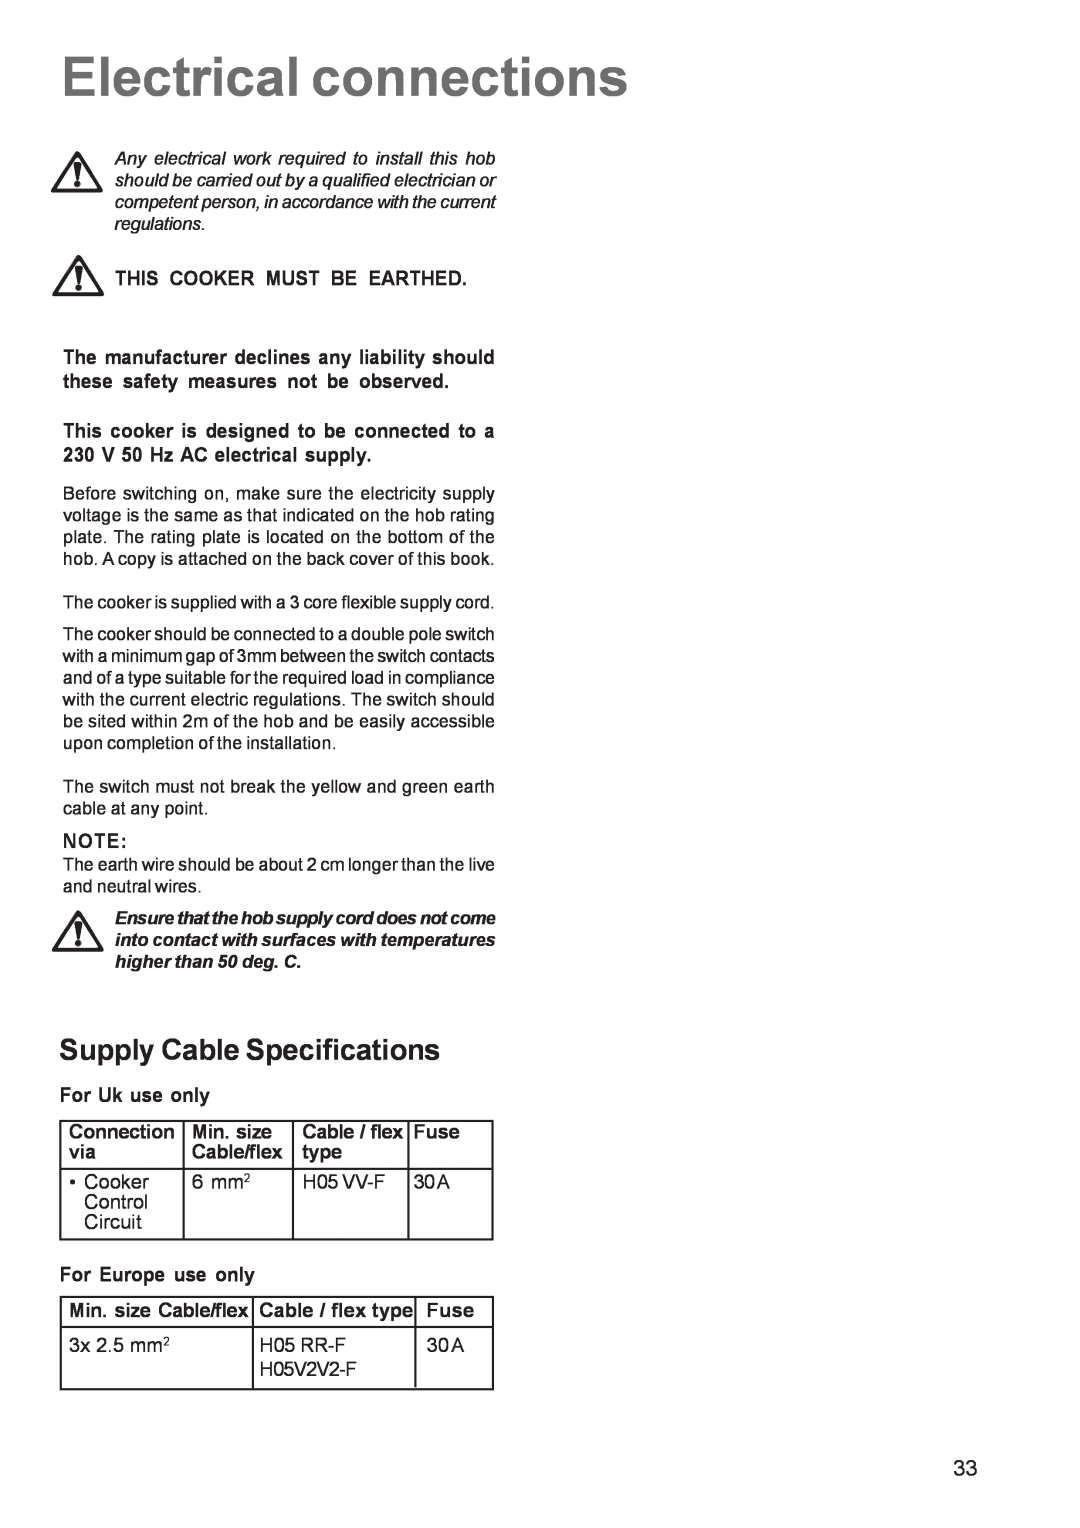 Zanussi ZCM 650 ZCM 651 Electrical connections, Supply Cable Specifications, Cooker, 6 mm, H05 VV-F, Control, Circuit 